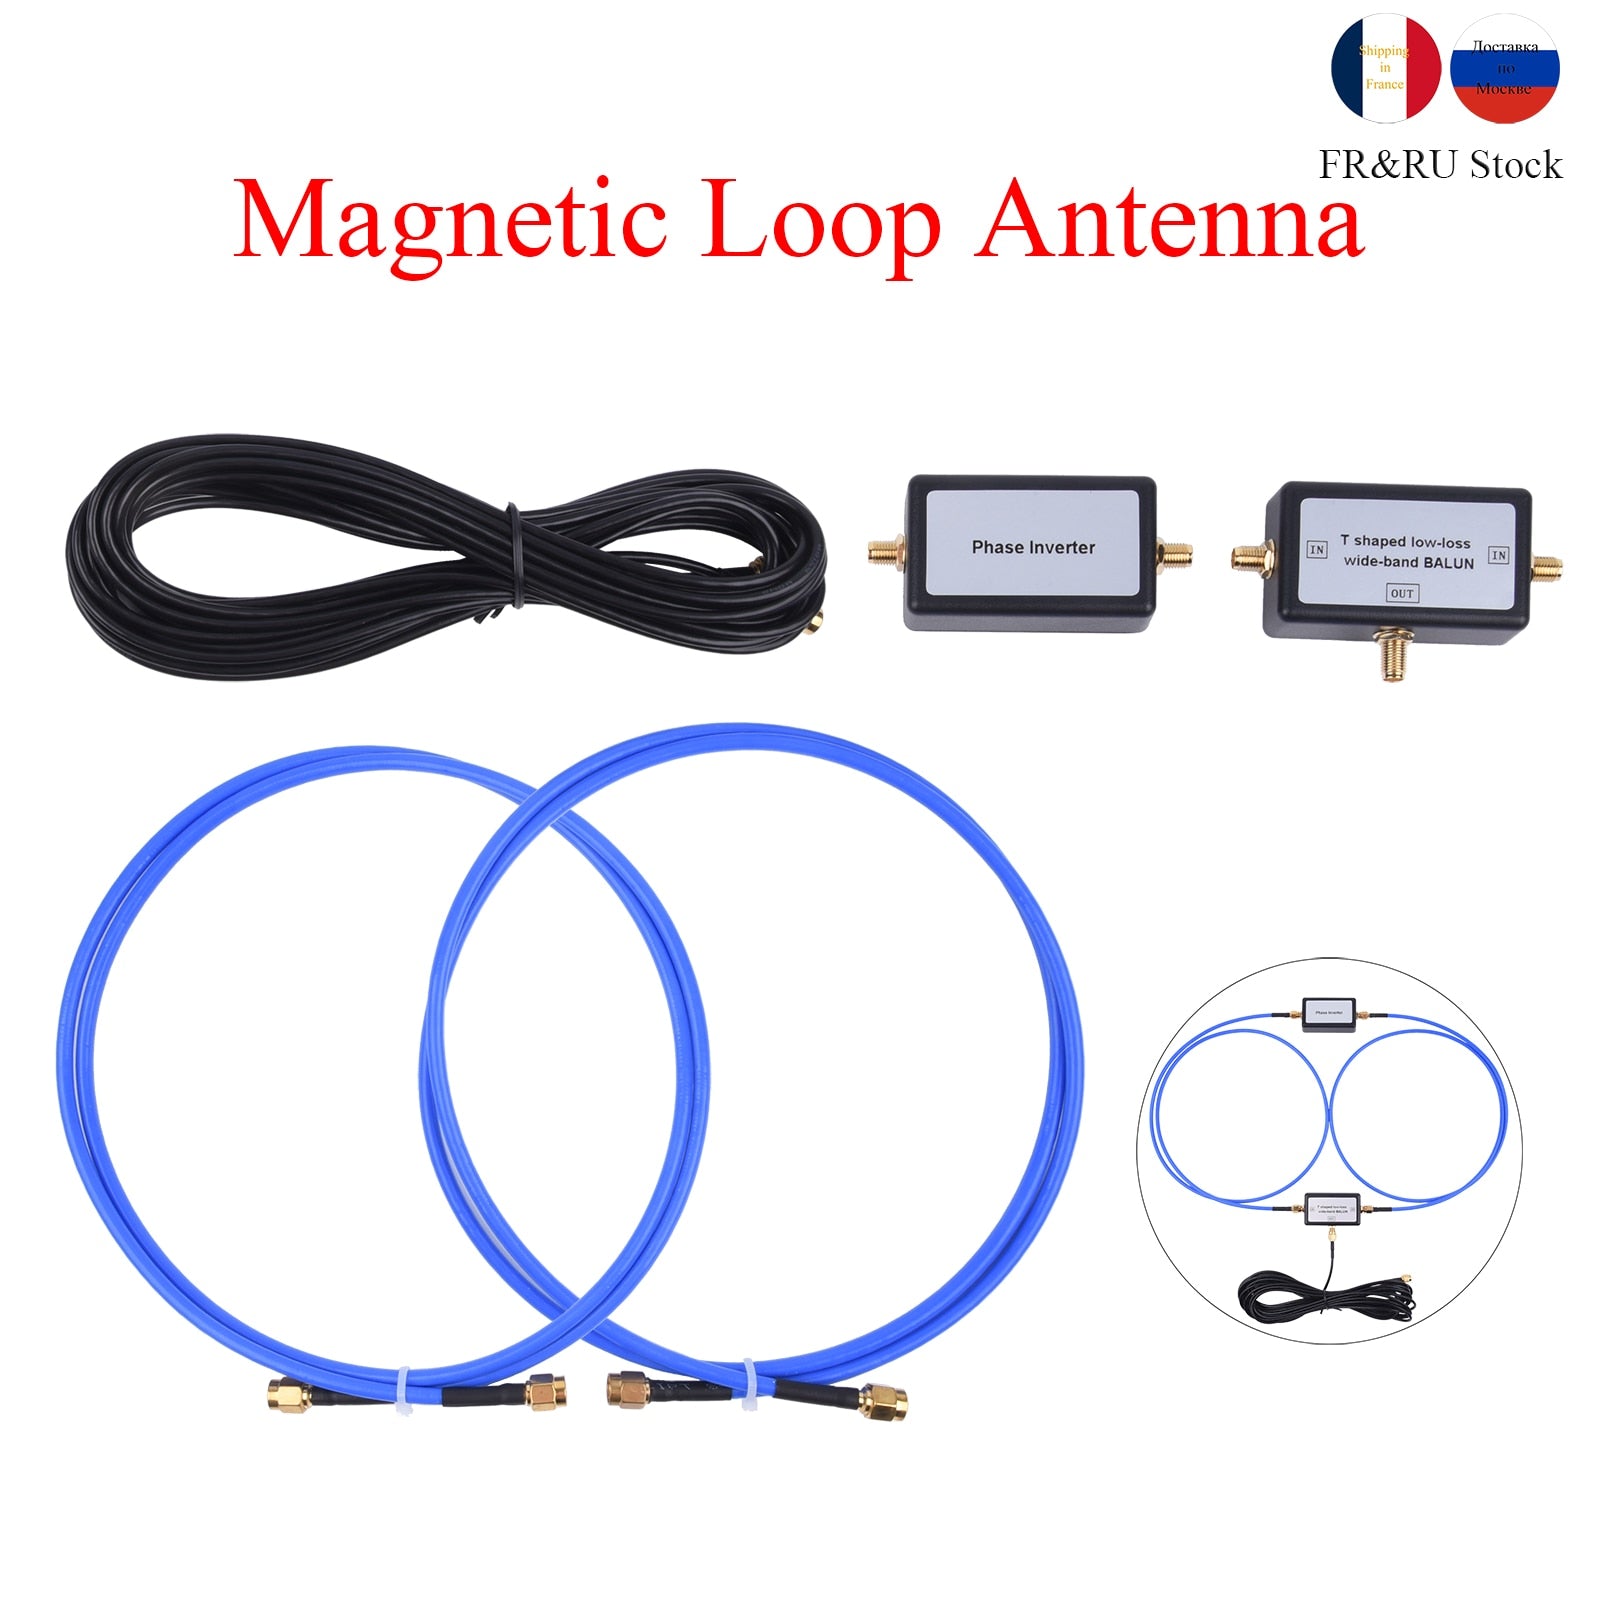 FR&RU Warehouse YouLoop Magnetic Antenna Portable 250mW Passive Magnetic SMA/BNC/3.5MM Audio Low Loss Broadband For HF and VHF